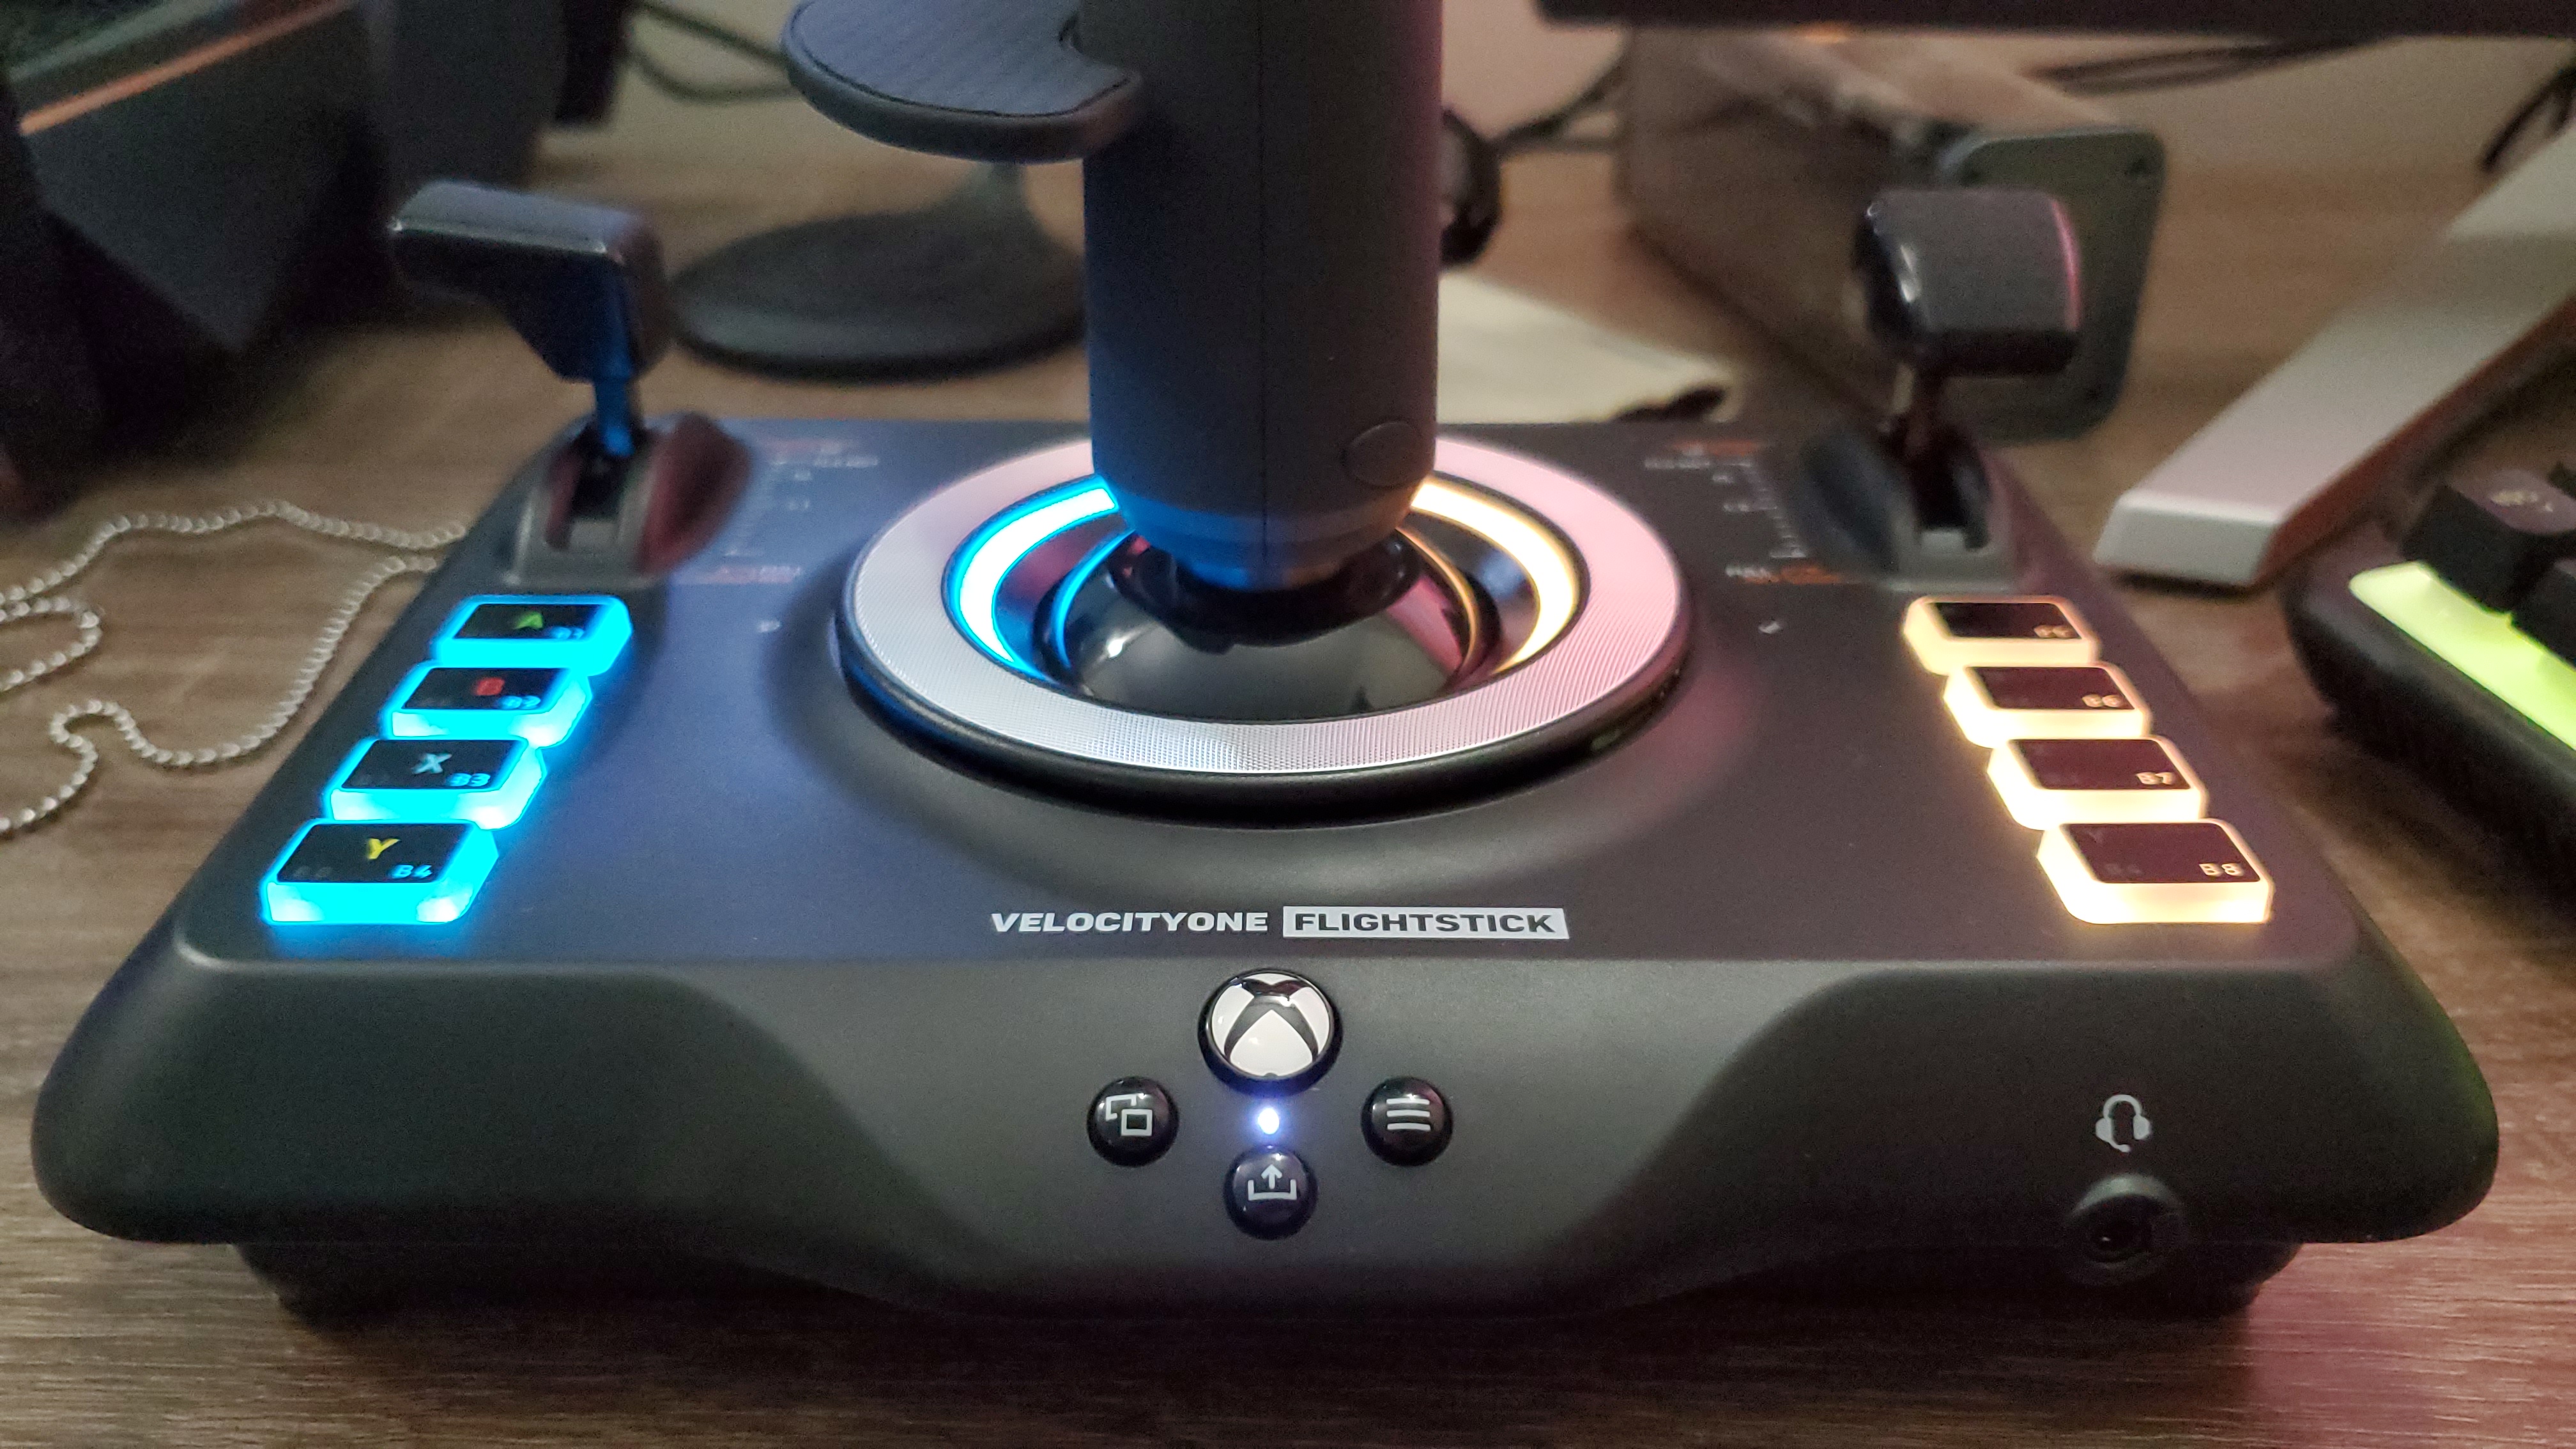 VelocityOne Flightstick review: a stick to get you by - digitec